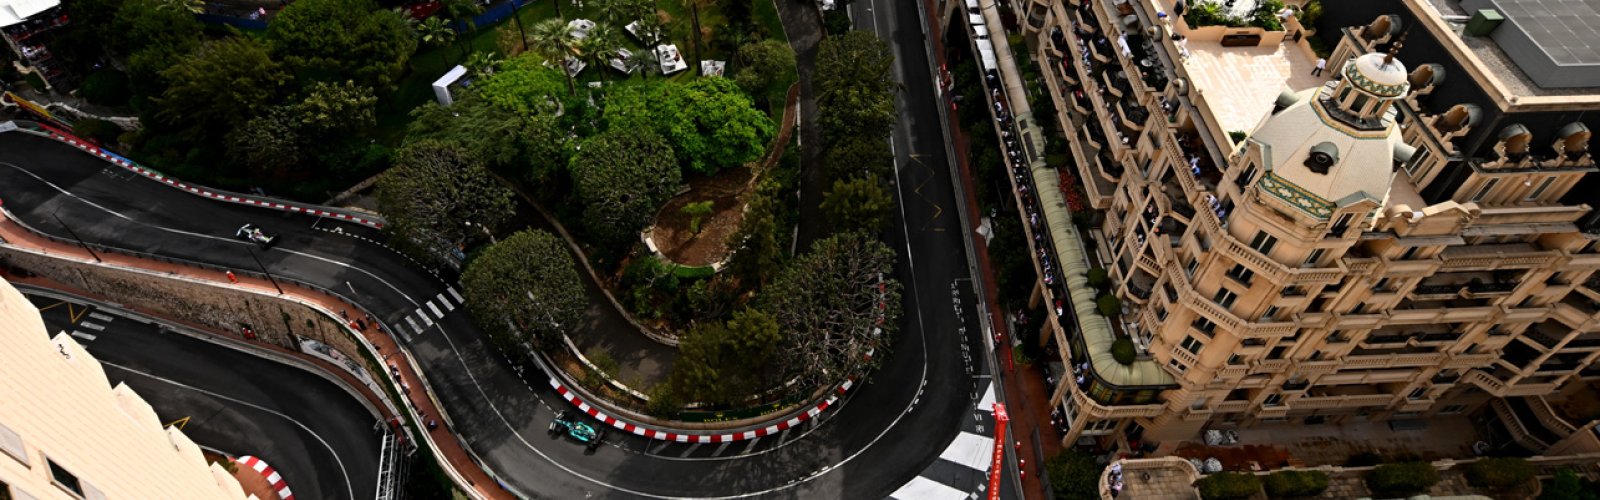 Experience an incredible weekend of action on and off the track at the Monaco Grand Prix